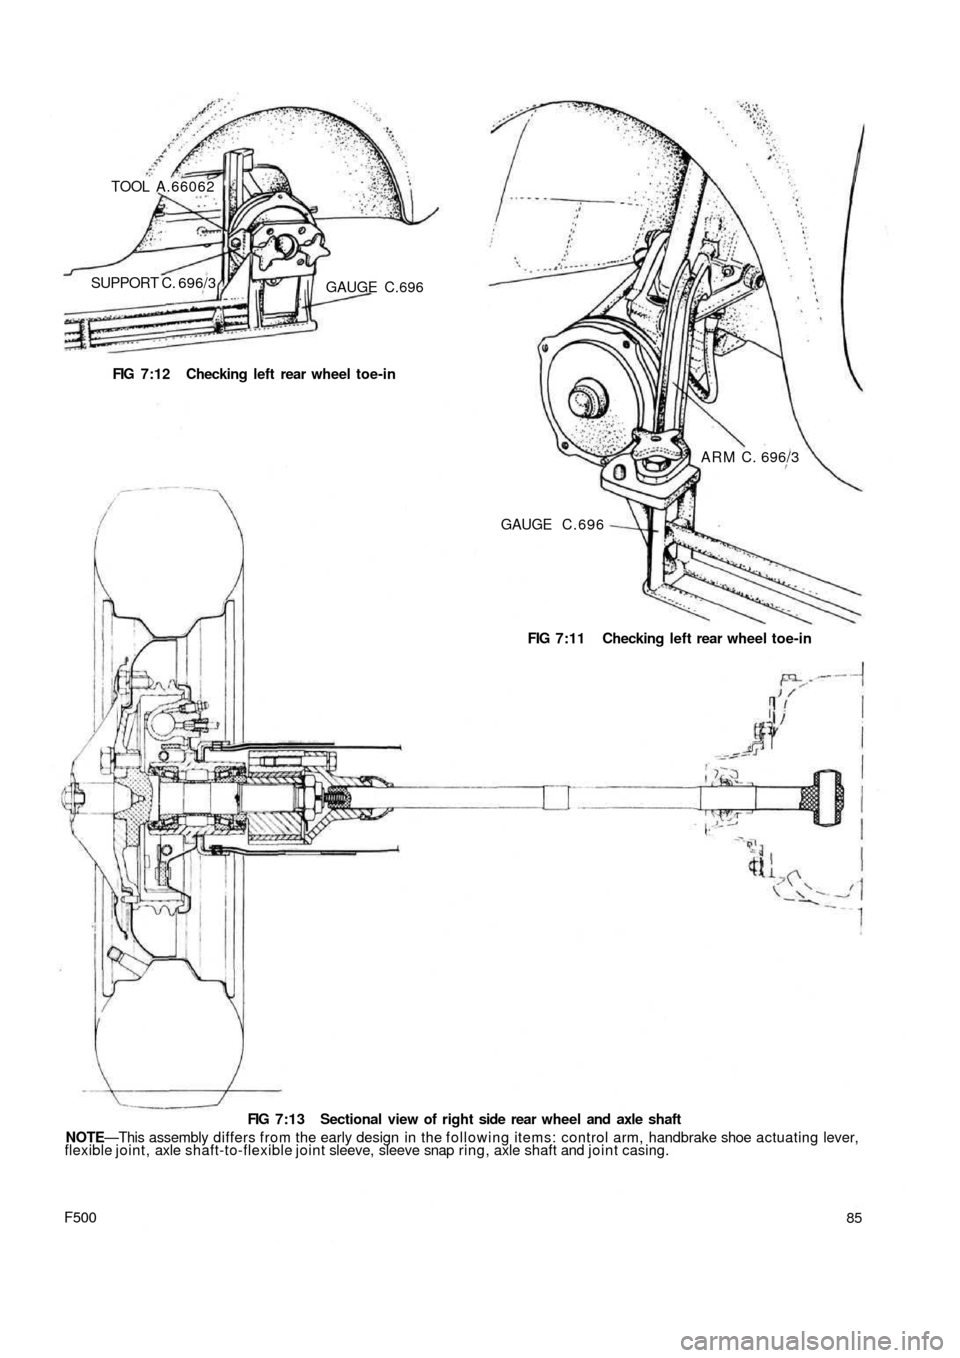 FIAT 500 1959 1.G Workshop Manual TOOL A.66062
SUPPORT C. 696/3GAUGE C.696
FIG 7:12 Checking left rear wheel toe-in
ARM C. 696/3
GAUGE C . 6 9 6
FIG 7:11 Checking left rear wheel toe-in
F500
FIG 7:13 Sectional view of right side rear 